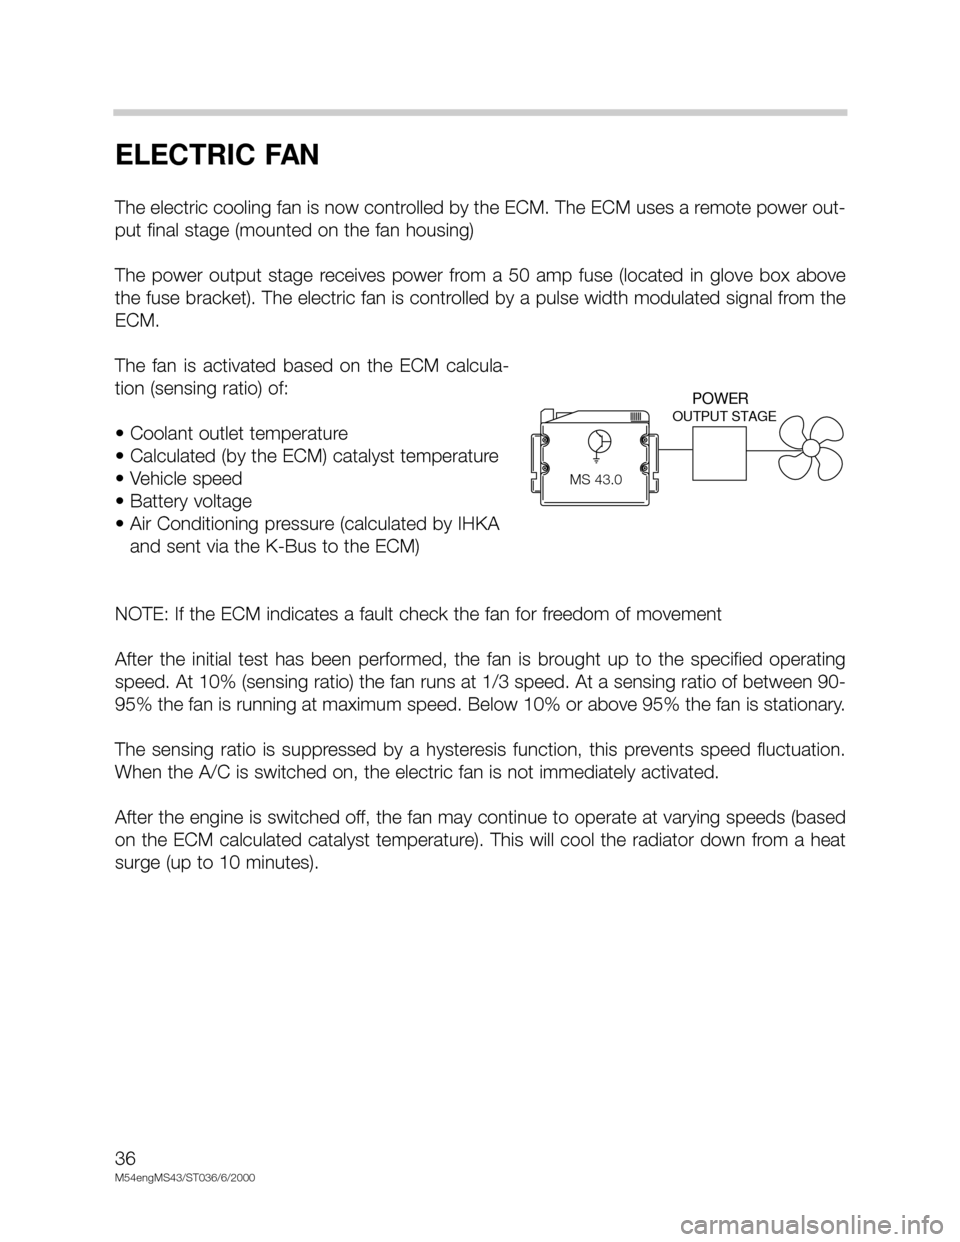 BMW X5 2001 E53 M54 Engine Workshop Manual 36
M54engMS43/ST036/6/2000
ELECTRIC FAN
The electric cooling fan is now controlled by the ECM. The ECM uses a remote power out-
put final stage (mounted on the fan housing)
The  power  output  stage  